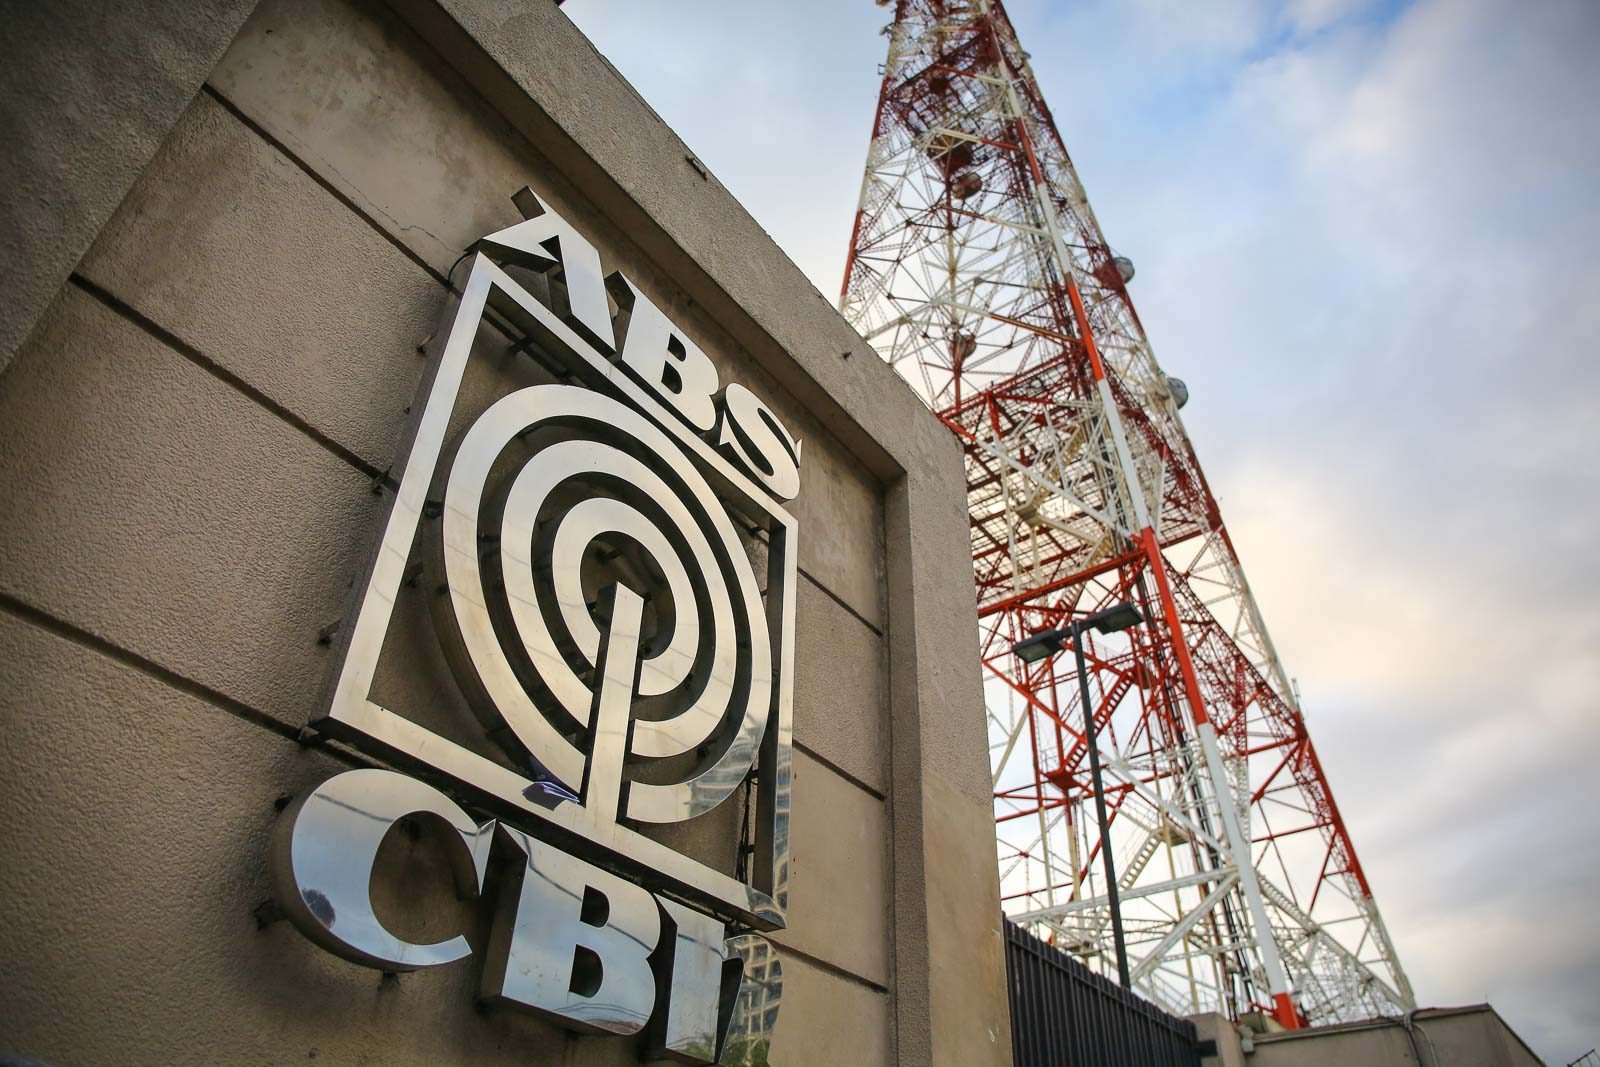 ABS-CBN CEO breaks silence on network franchise issue